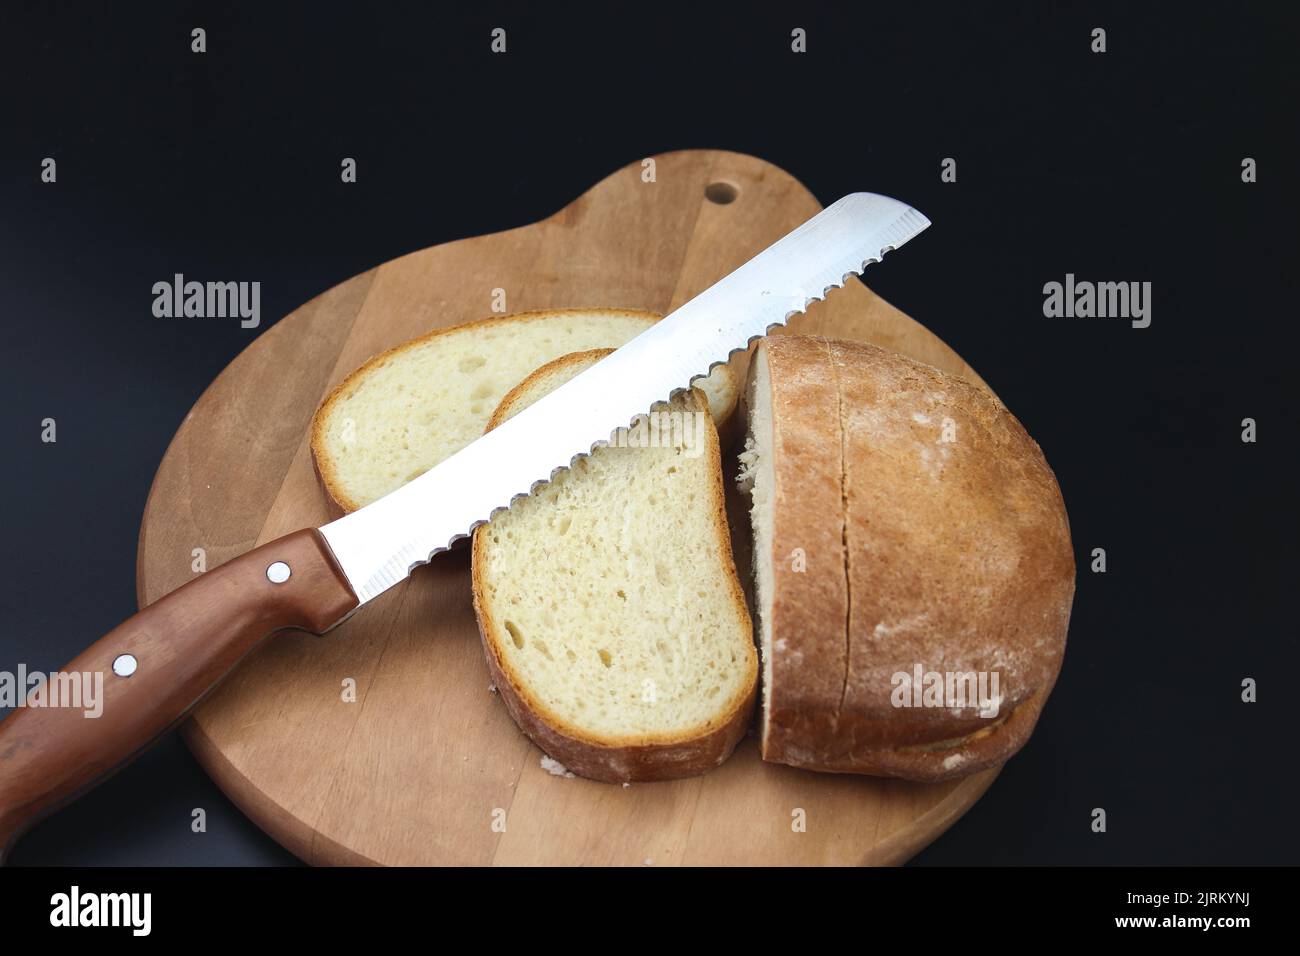 Freshly baked Bread, sliced with a serrated bread knife on a wooden cutting board. Stock Photo